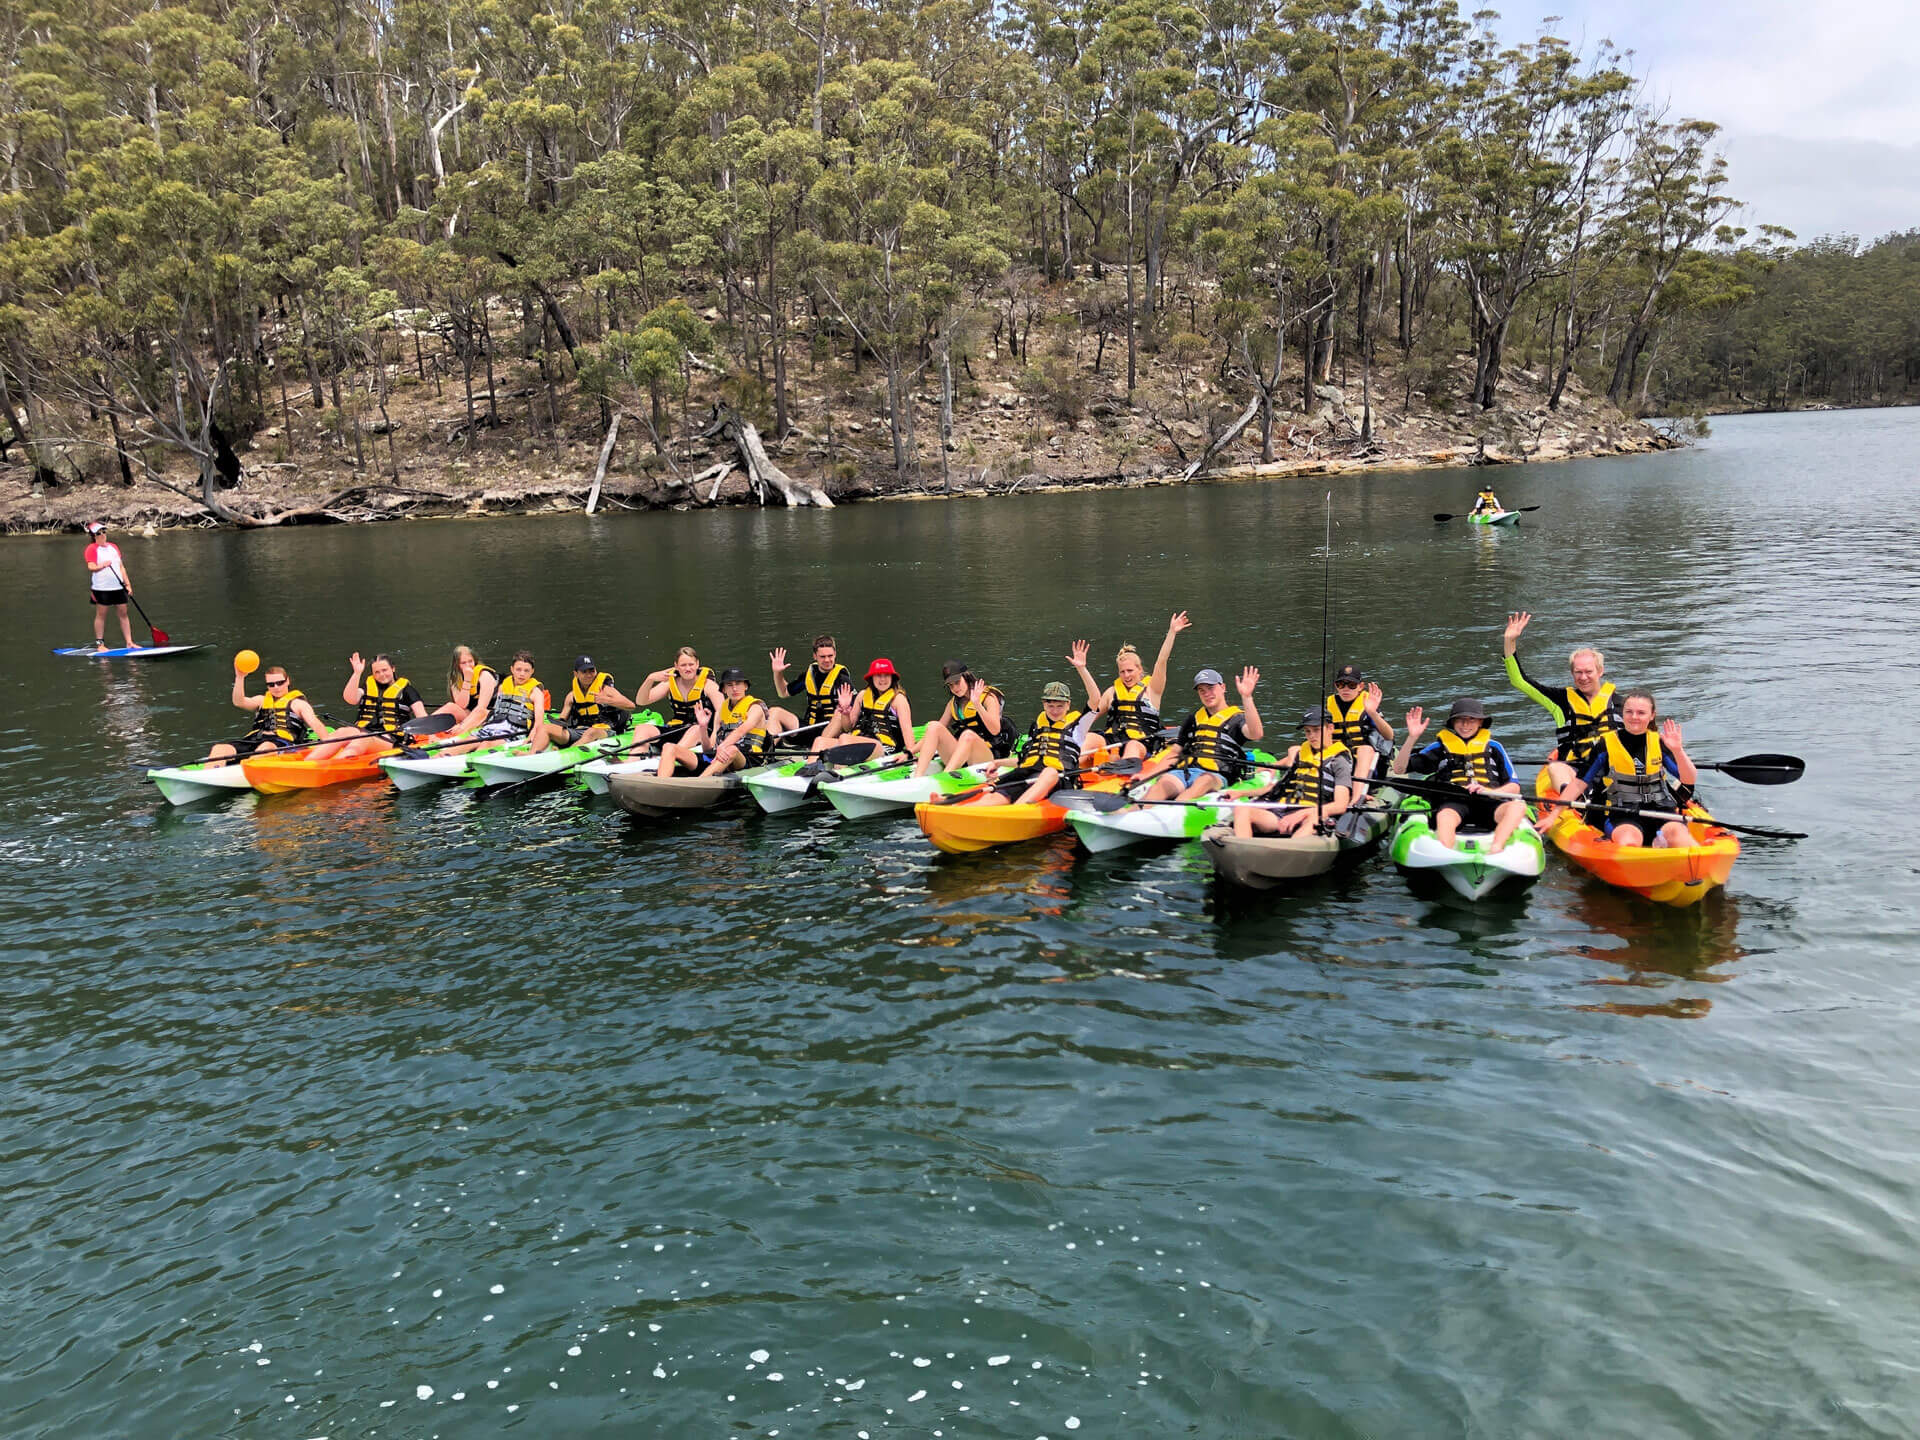 Large group of waving people with life jackets on in a row of green and orange coloured kayaks